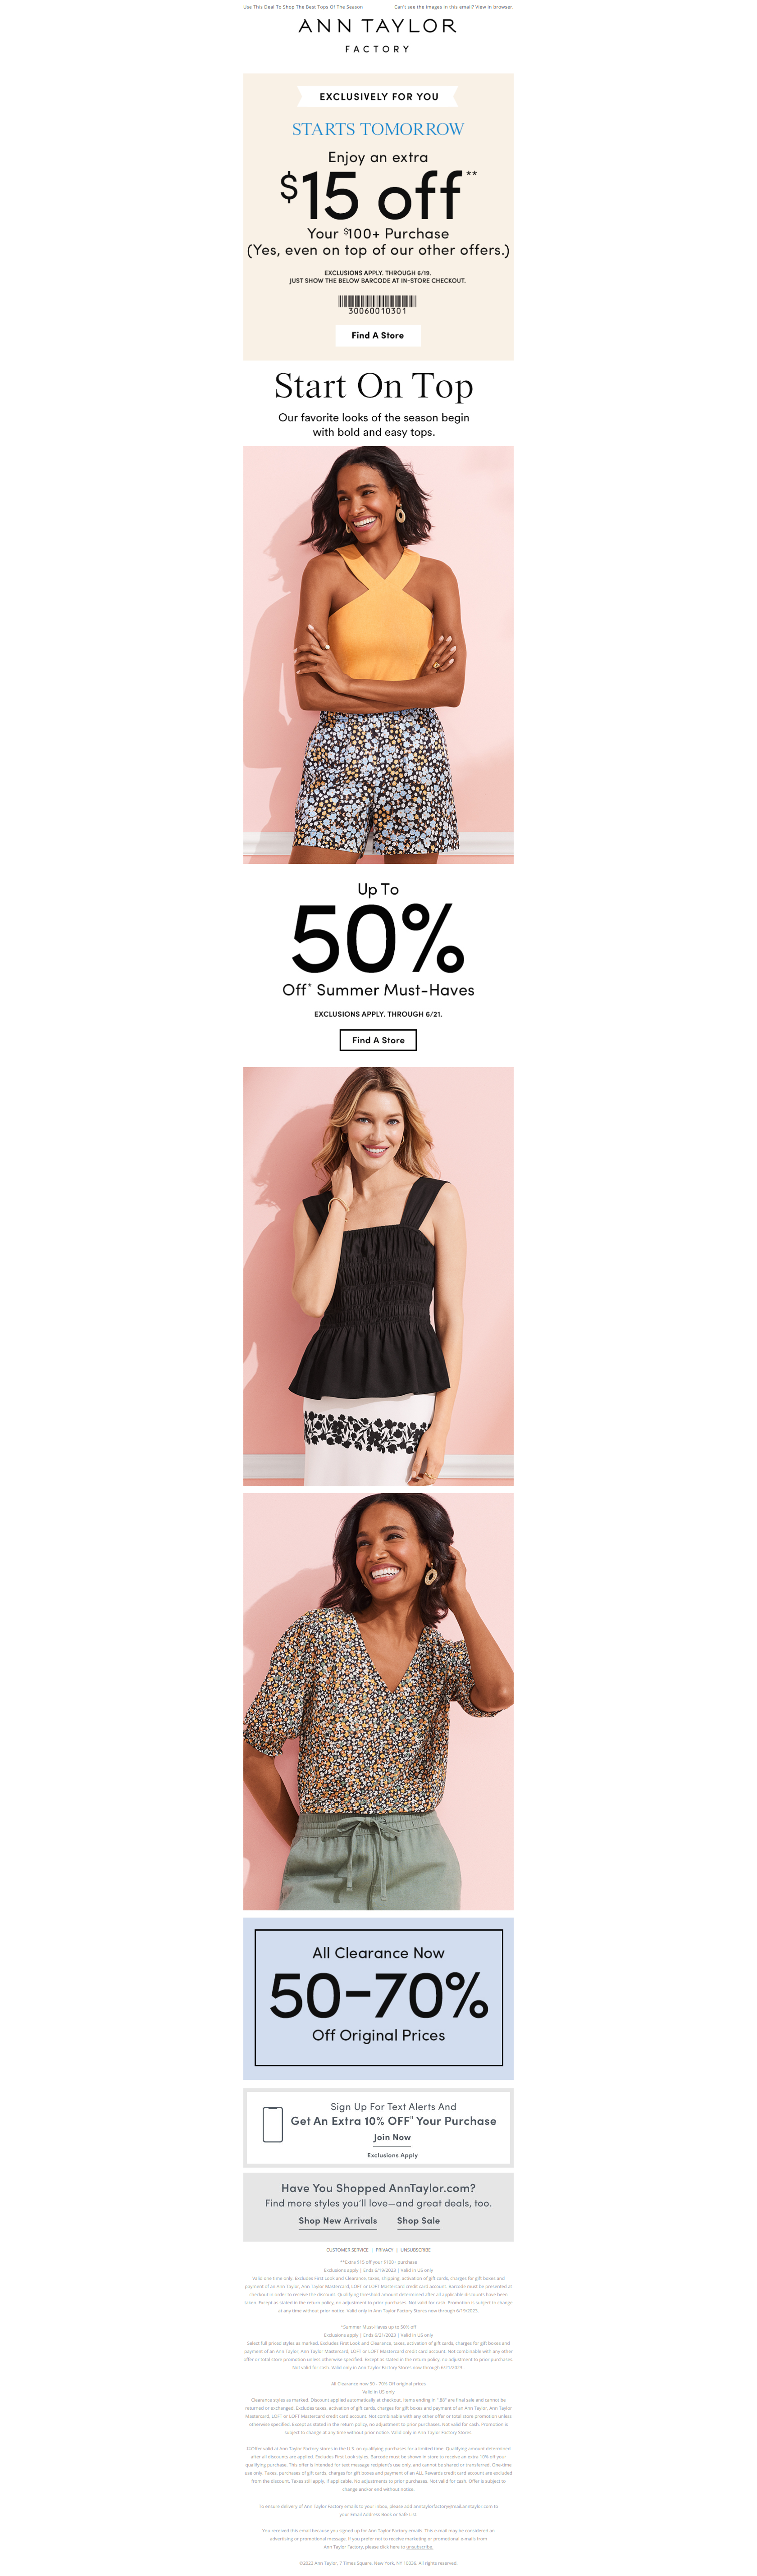 Up To 50% Off Summer Must-Haves + Extra $15 Off - Ann Taylor Factory Newsletter